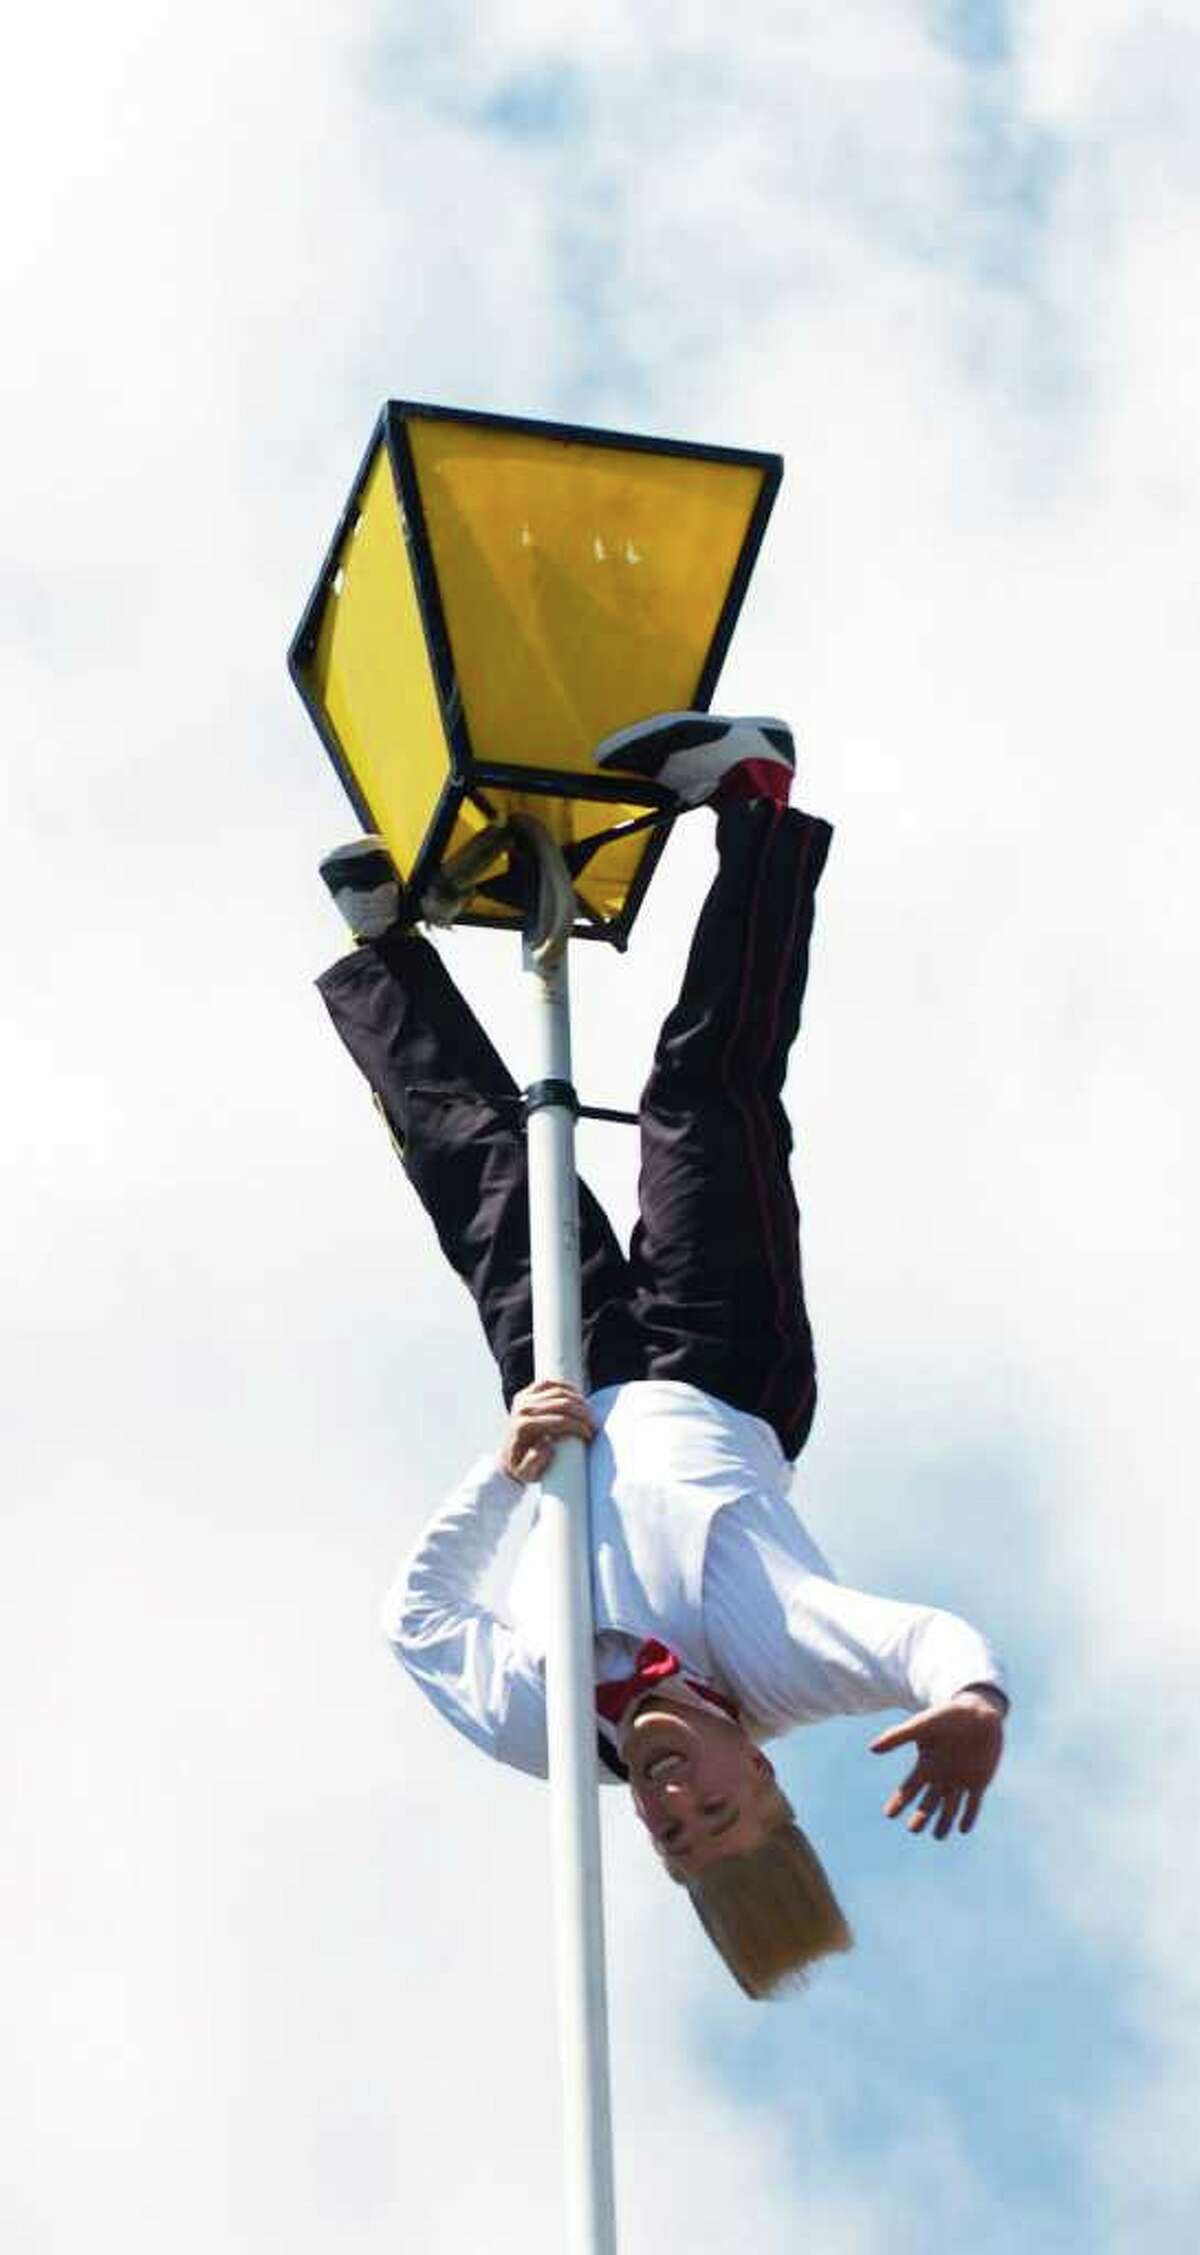 Bello Nock, the most famous daredevil clown, and star of the Big Apple Circus hangs upside down as he performs a stunt atop a 92 foot pole in Columbus Park on Tuesday May 4, 2010 in Stamford, Conn. The performance was to promote the Big Apple Circus' 32nd allñnew show, Bello is Back! as it makes its first ever appearance under the Big Top in Mill River Park from July 9 through July 25.